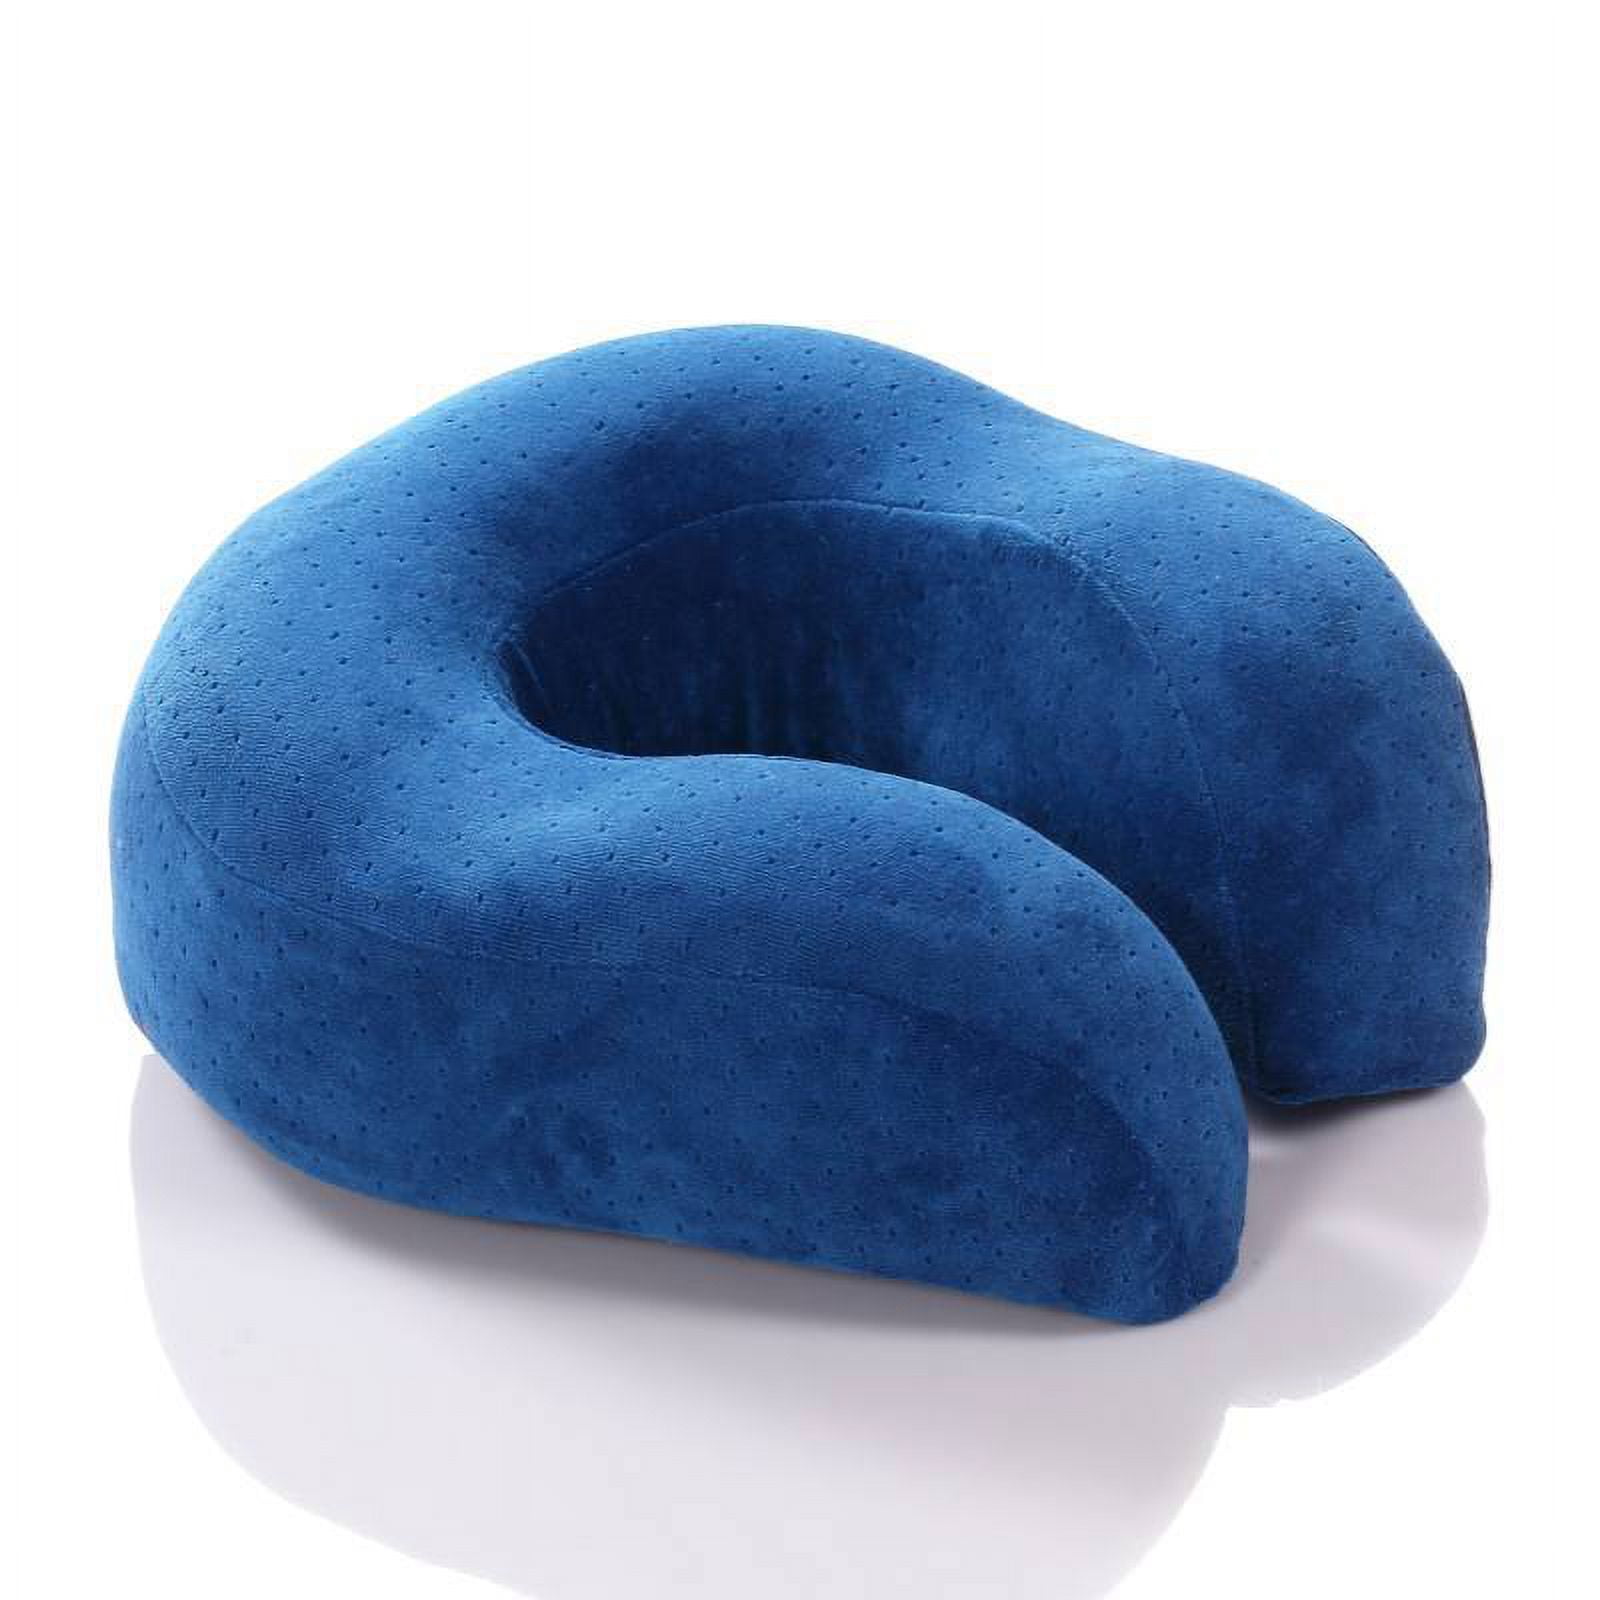 Noarlalf Seat Cushion Travel Neck Pillow Memory Foam Airplane Travel  Comfortable Washable Cover Plane Neck Support Pillow for Neck Sleeping  Chair Cushions 28*26*8 